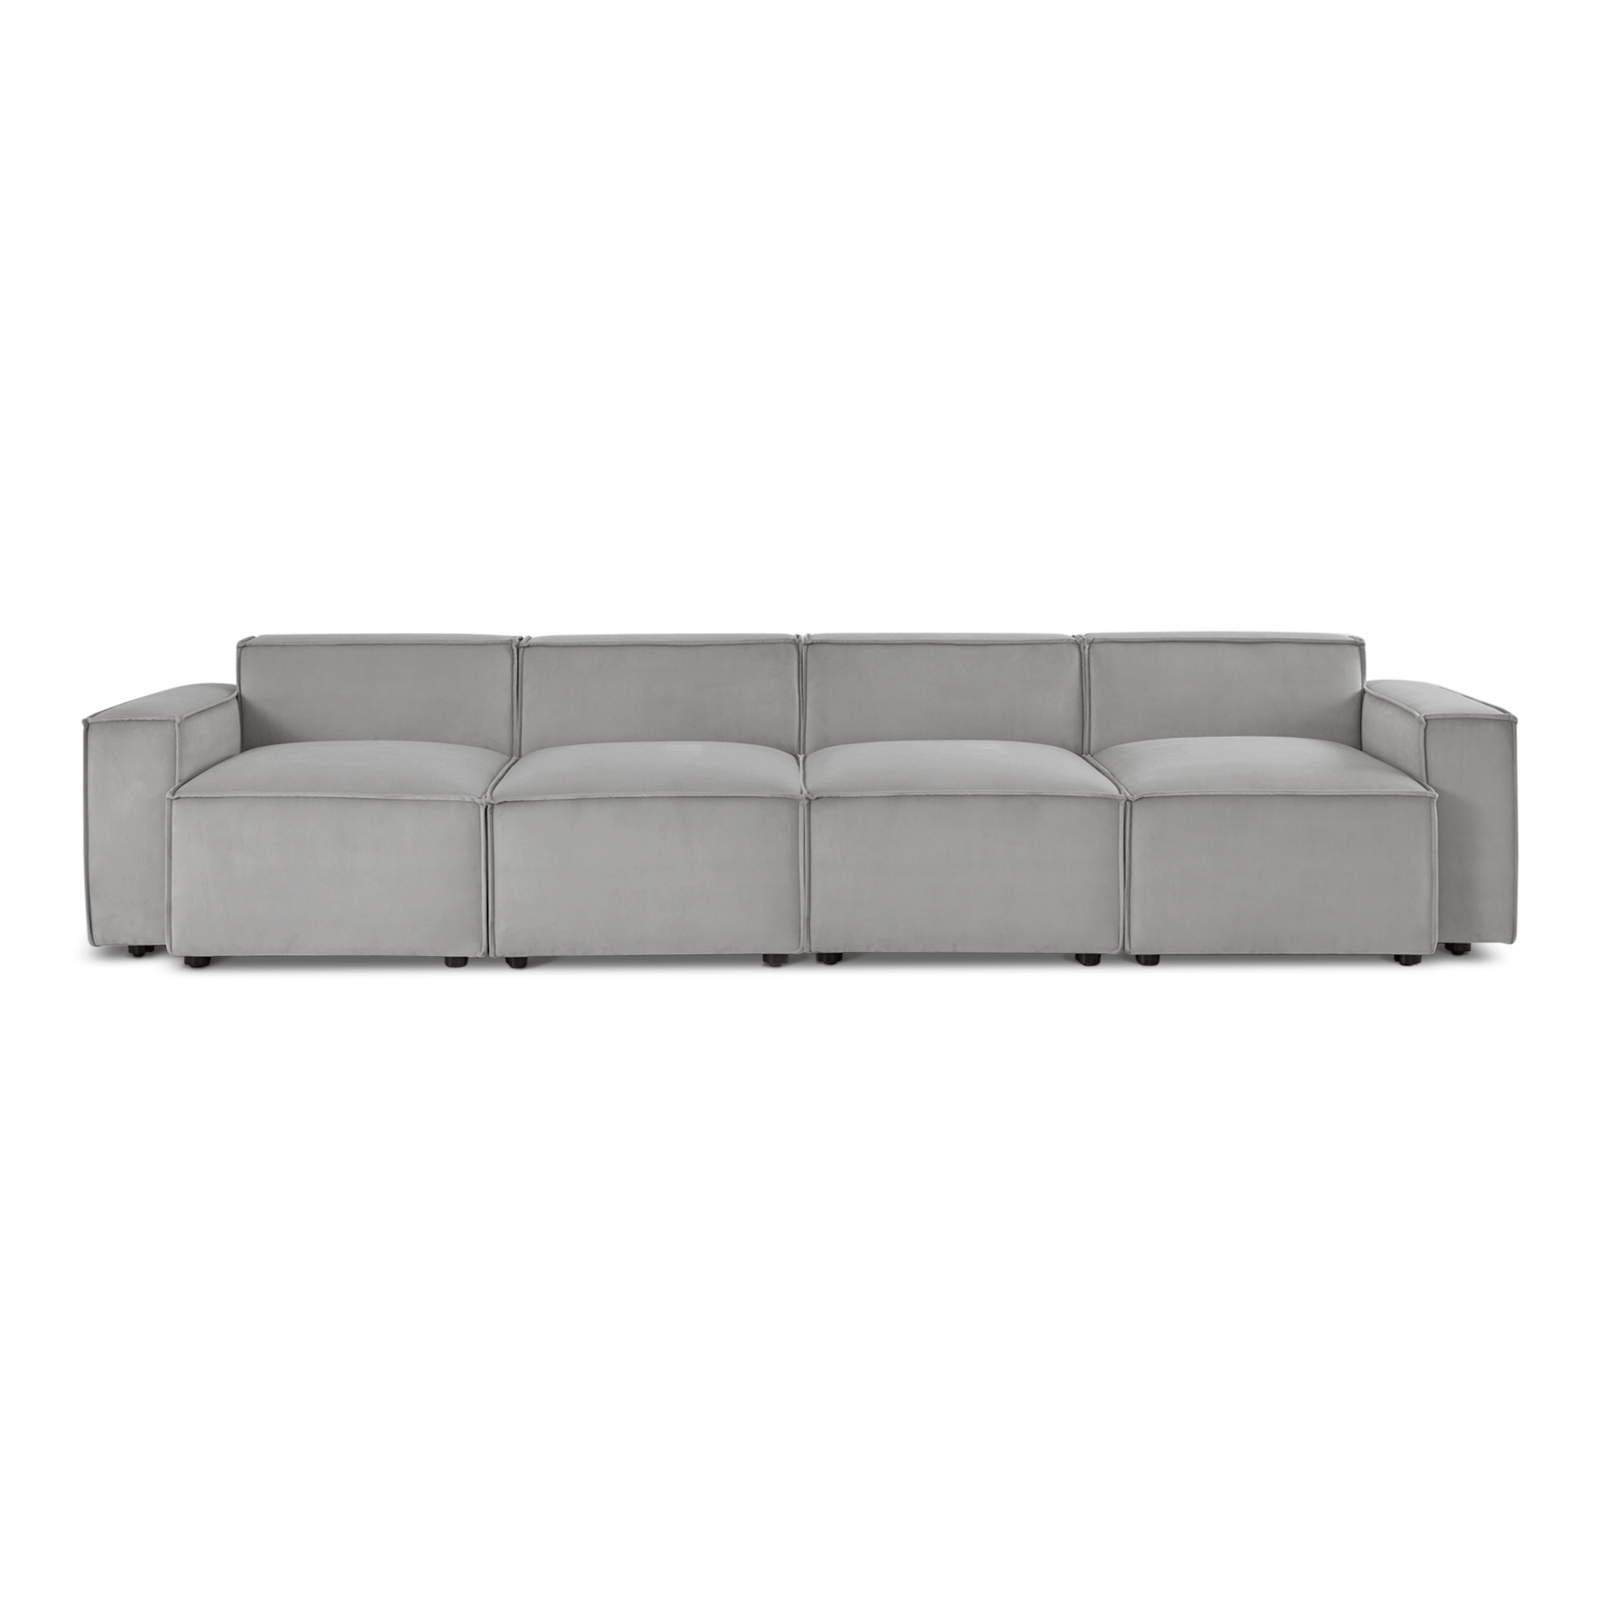 Swyft Model 03 4 Seater Sofa - MADE TO ORDER